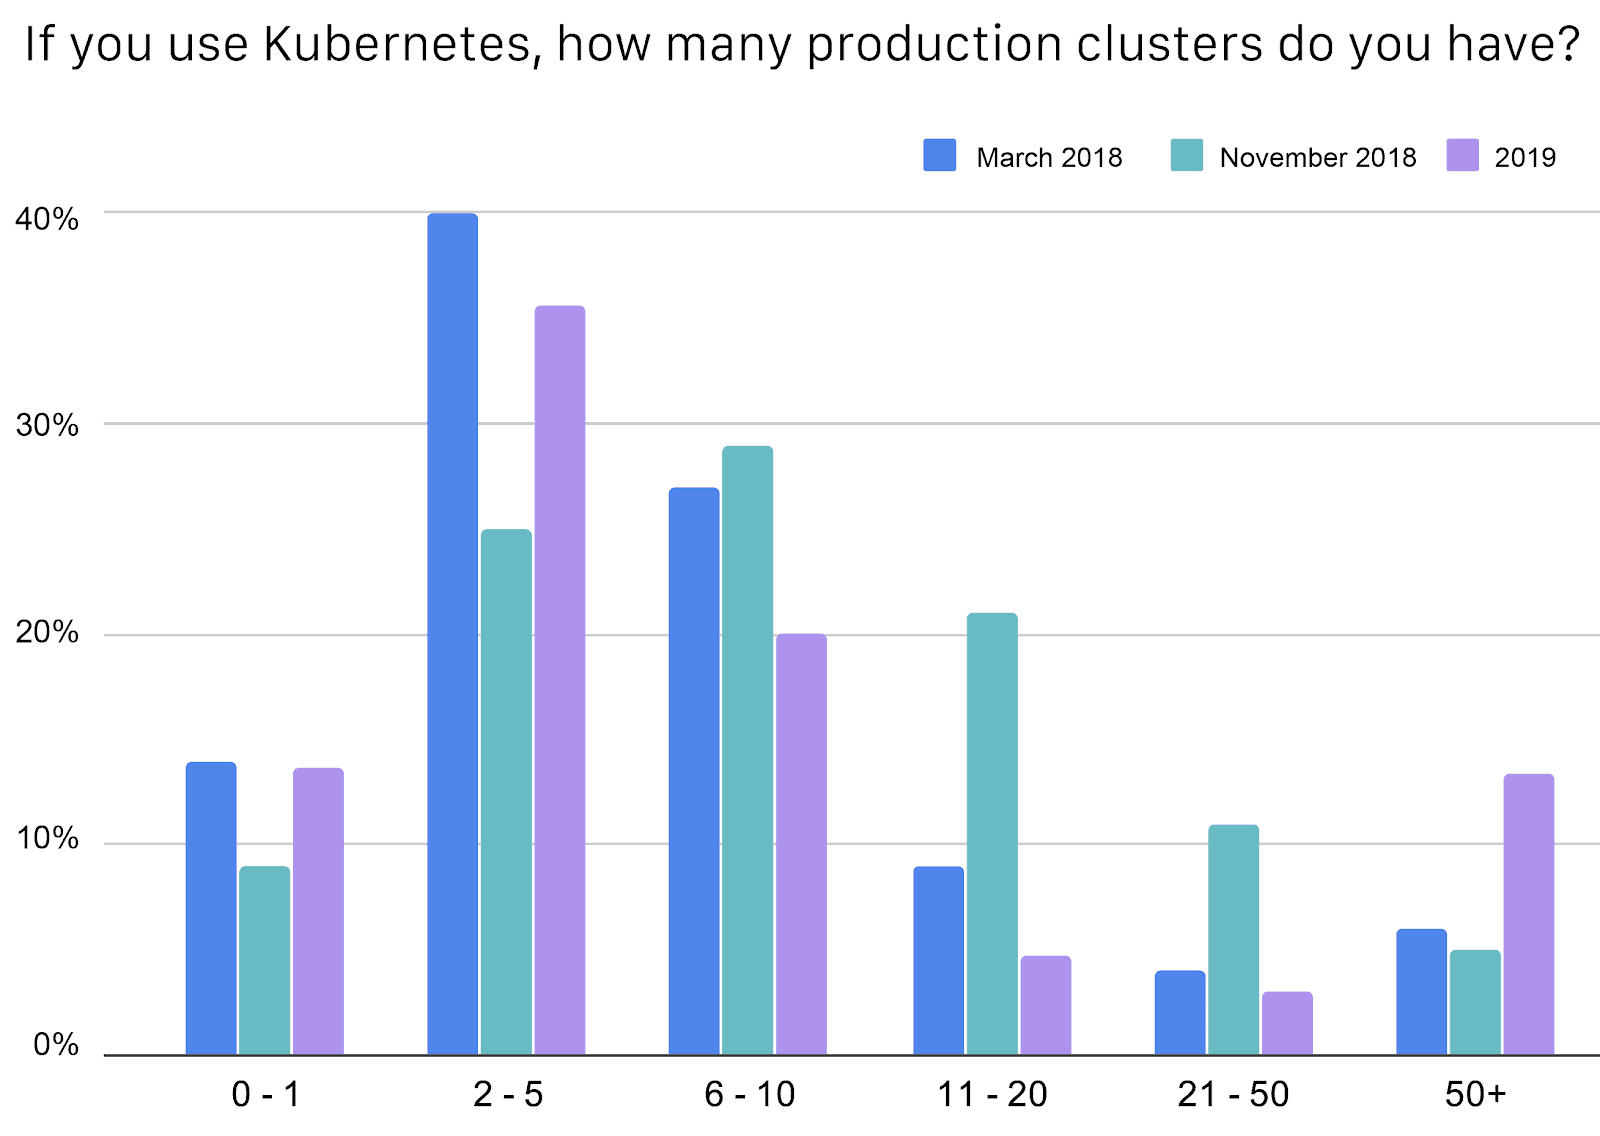 Bar chart showing most of Kubernetes users have 2-5 production clusters within March 2018, November 2018 ad 2019